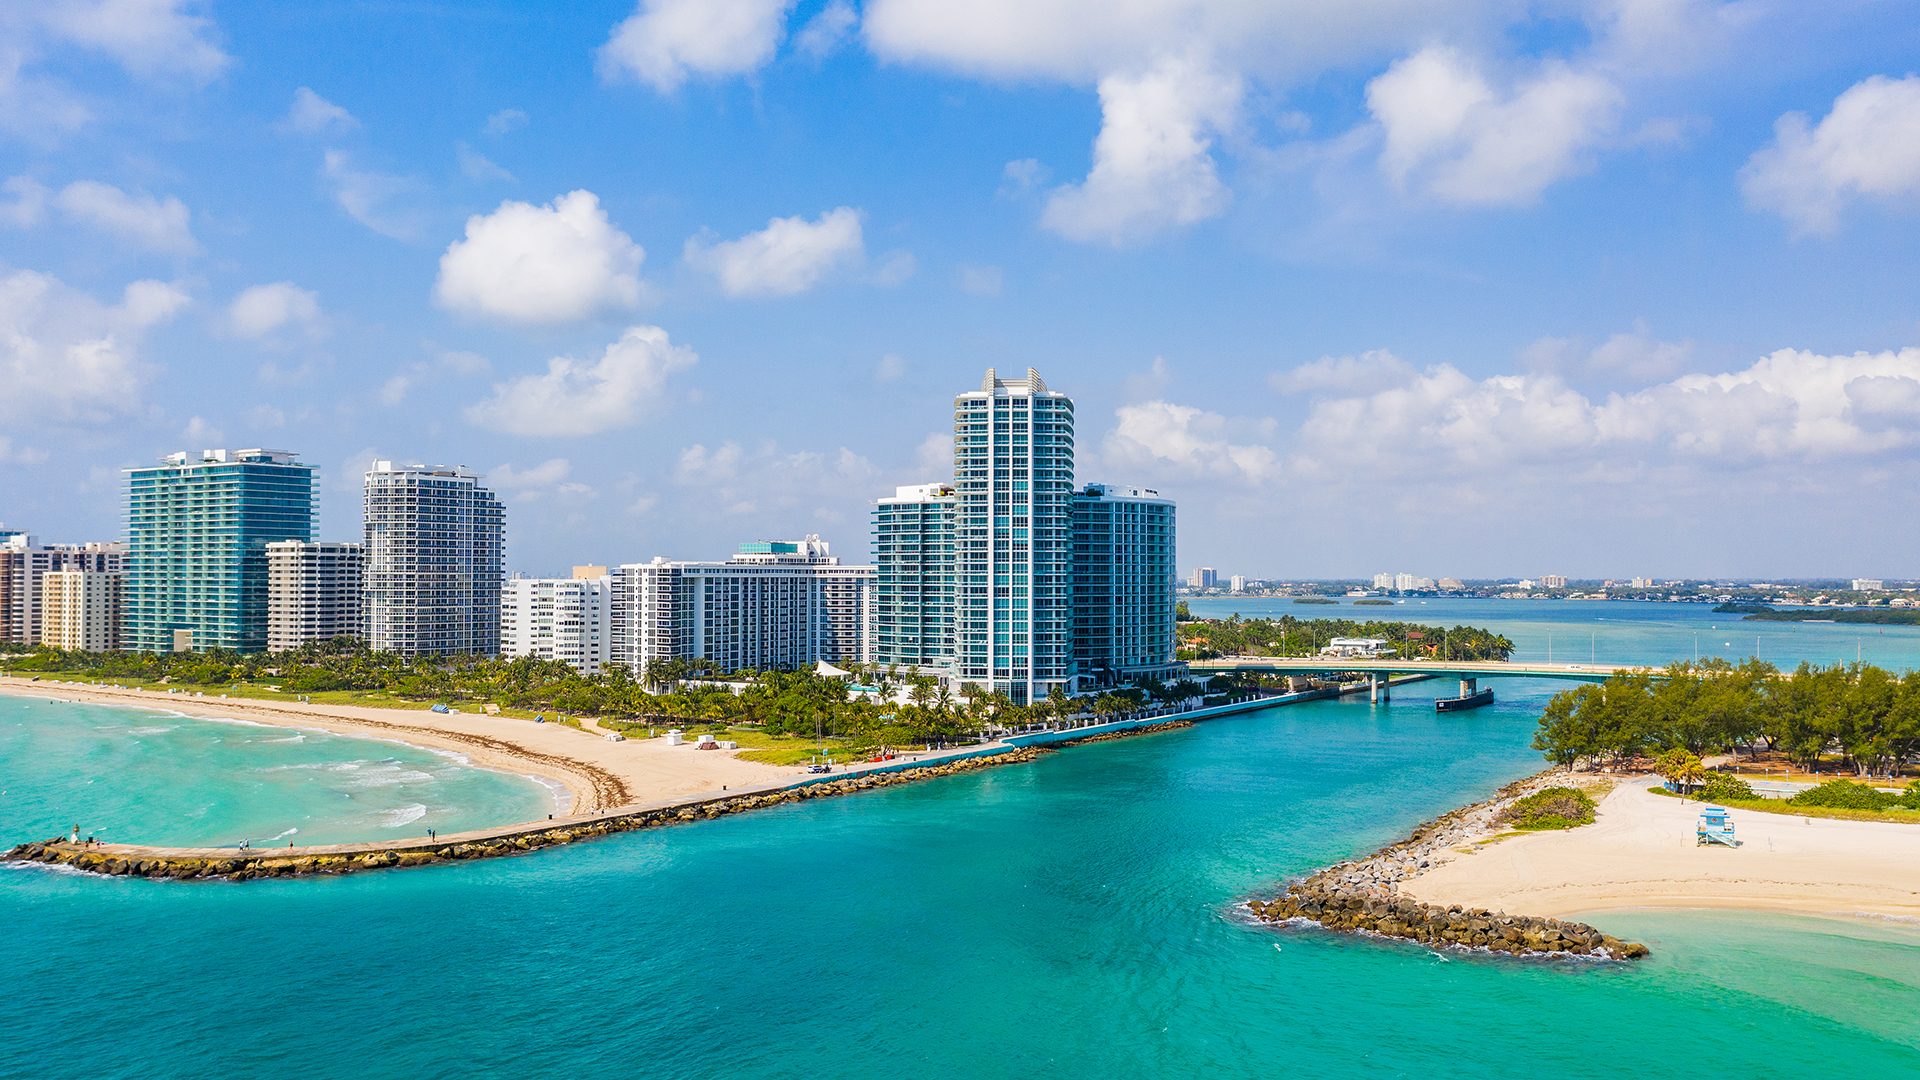 Aerial Residence 902 For Rent at One Bal Harbour, Luxury Oceanfront Condos in Bal Harbour, Miami, Florida 33154.